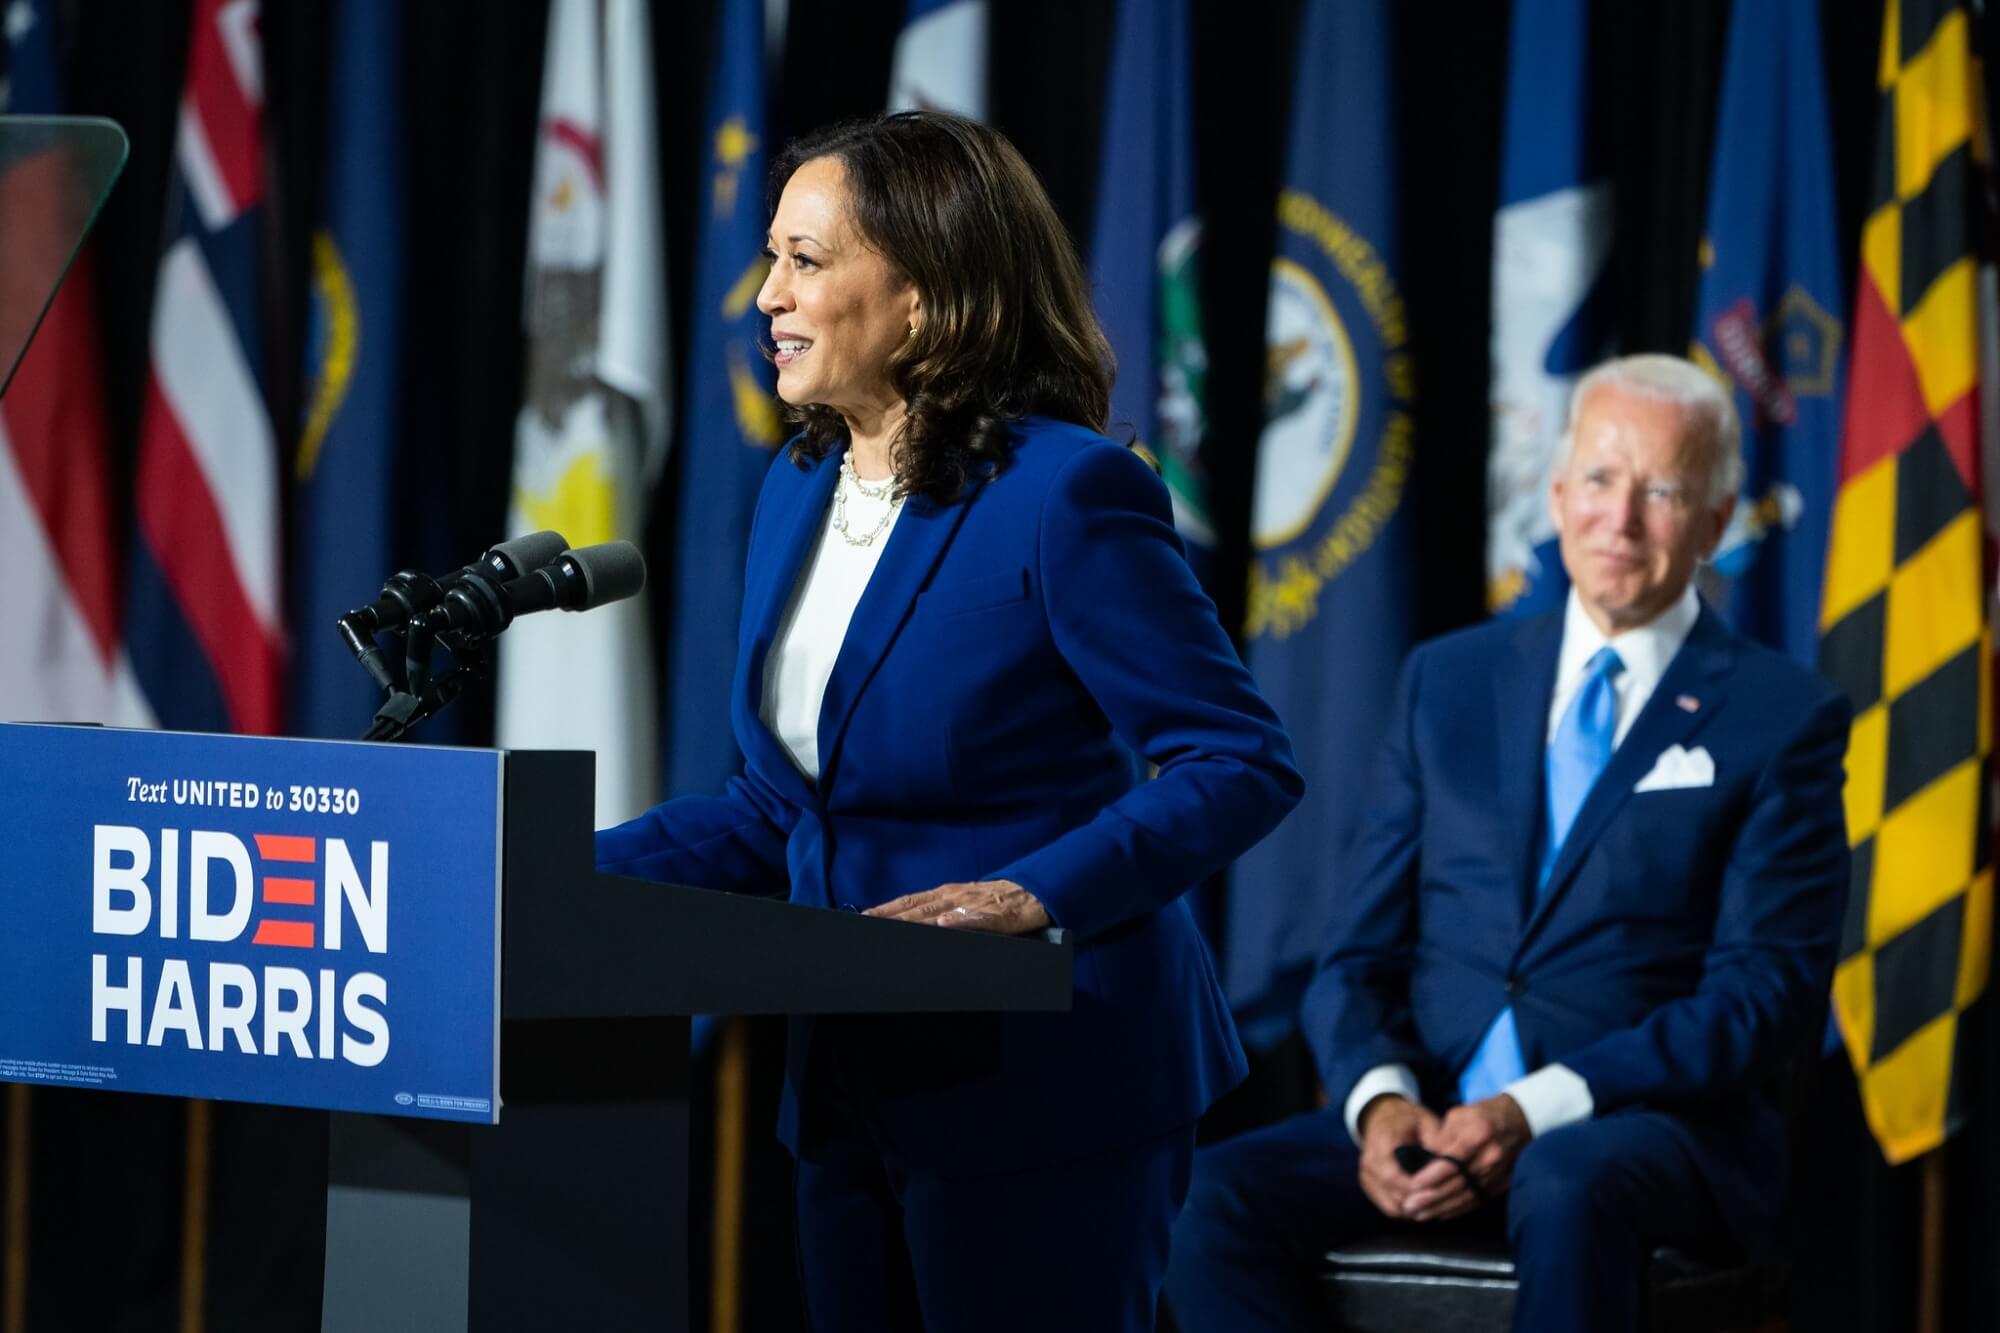 Senator Kamala Harris and former Vice President Joe Biden, who will be the Democratic Party candidate for president at the announcement on August 12, 2020, that she will be the vice presidential candidate. (Photo: Biden Campaign/IANS)